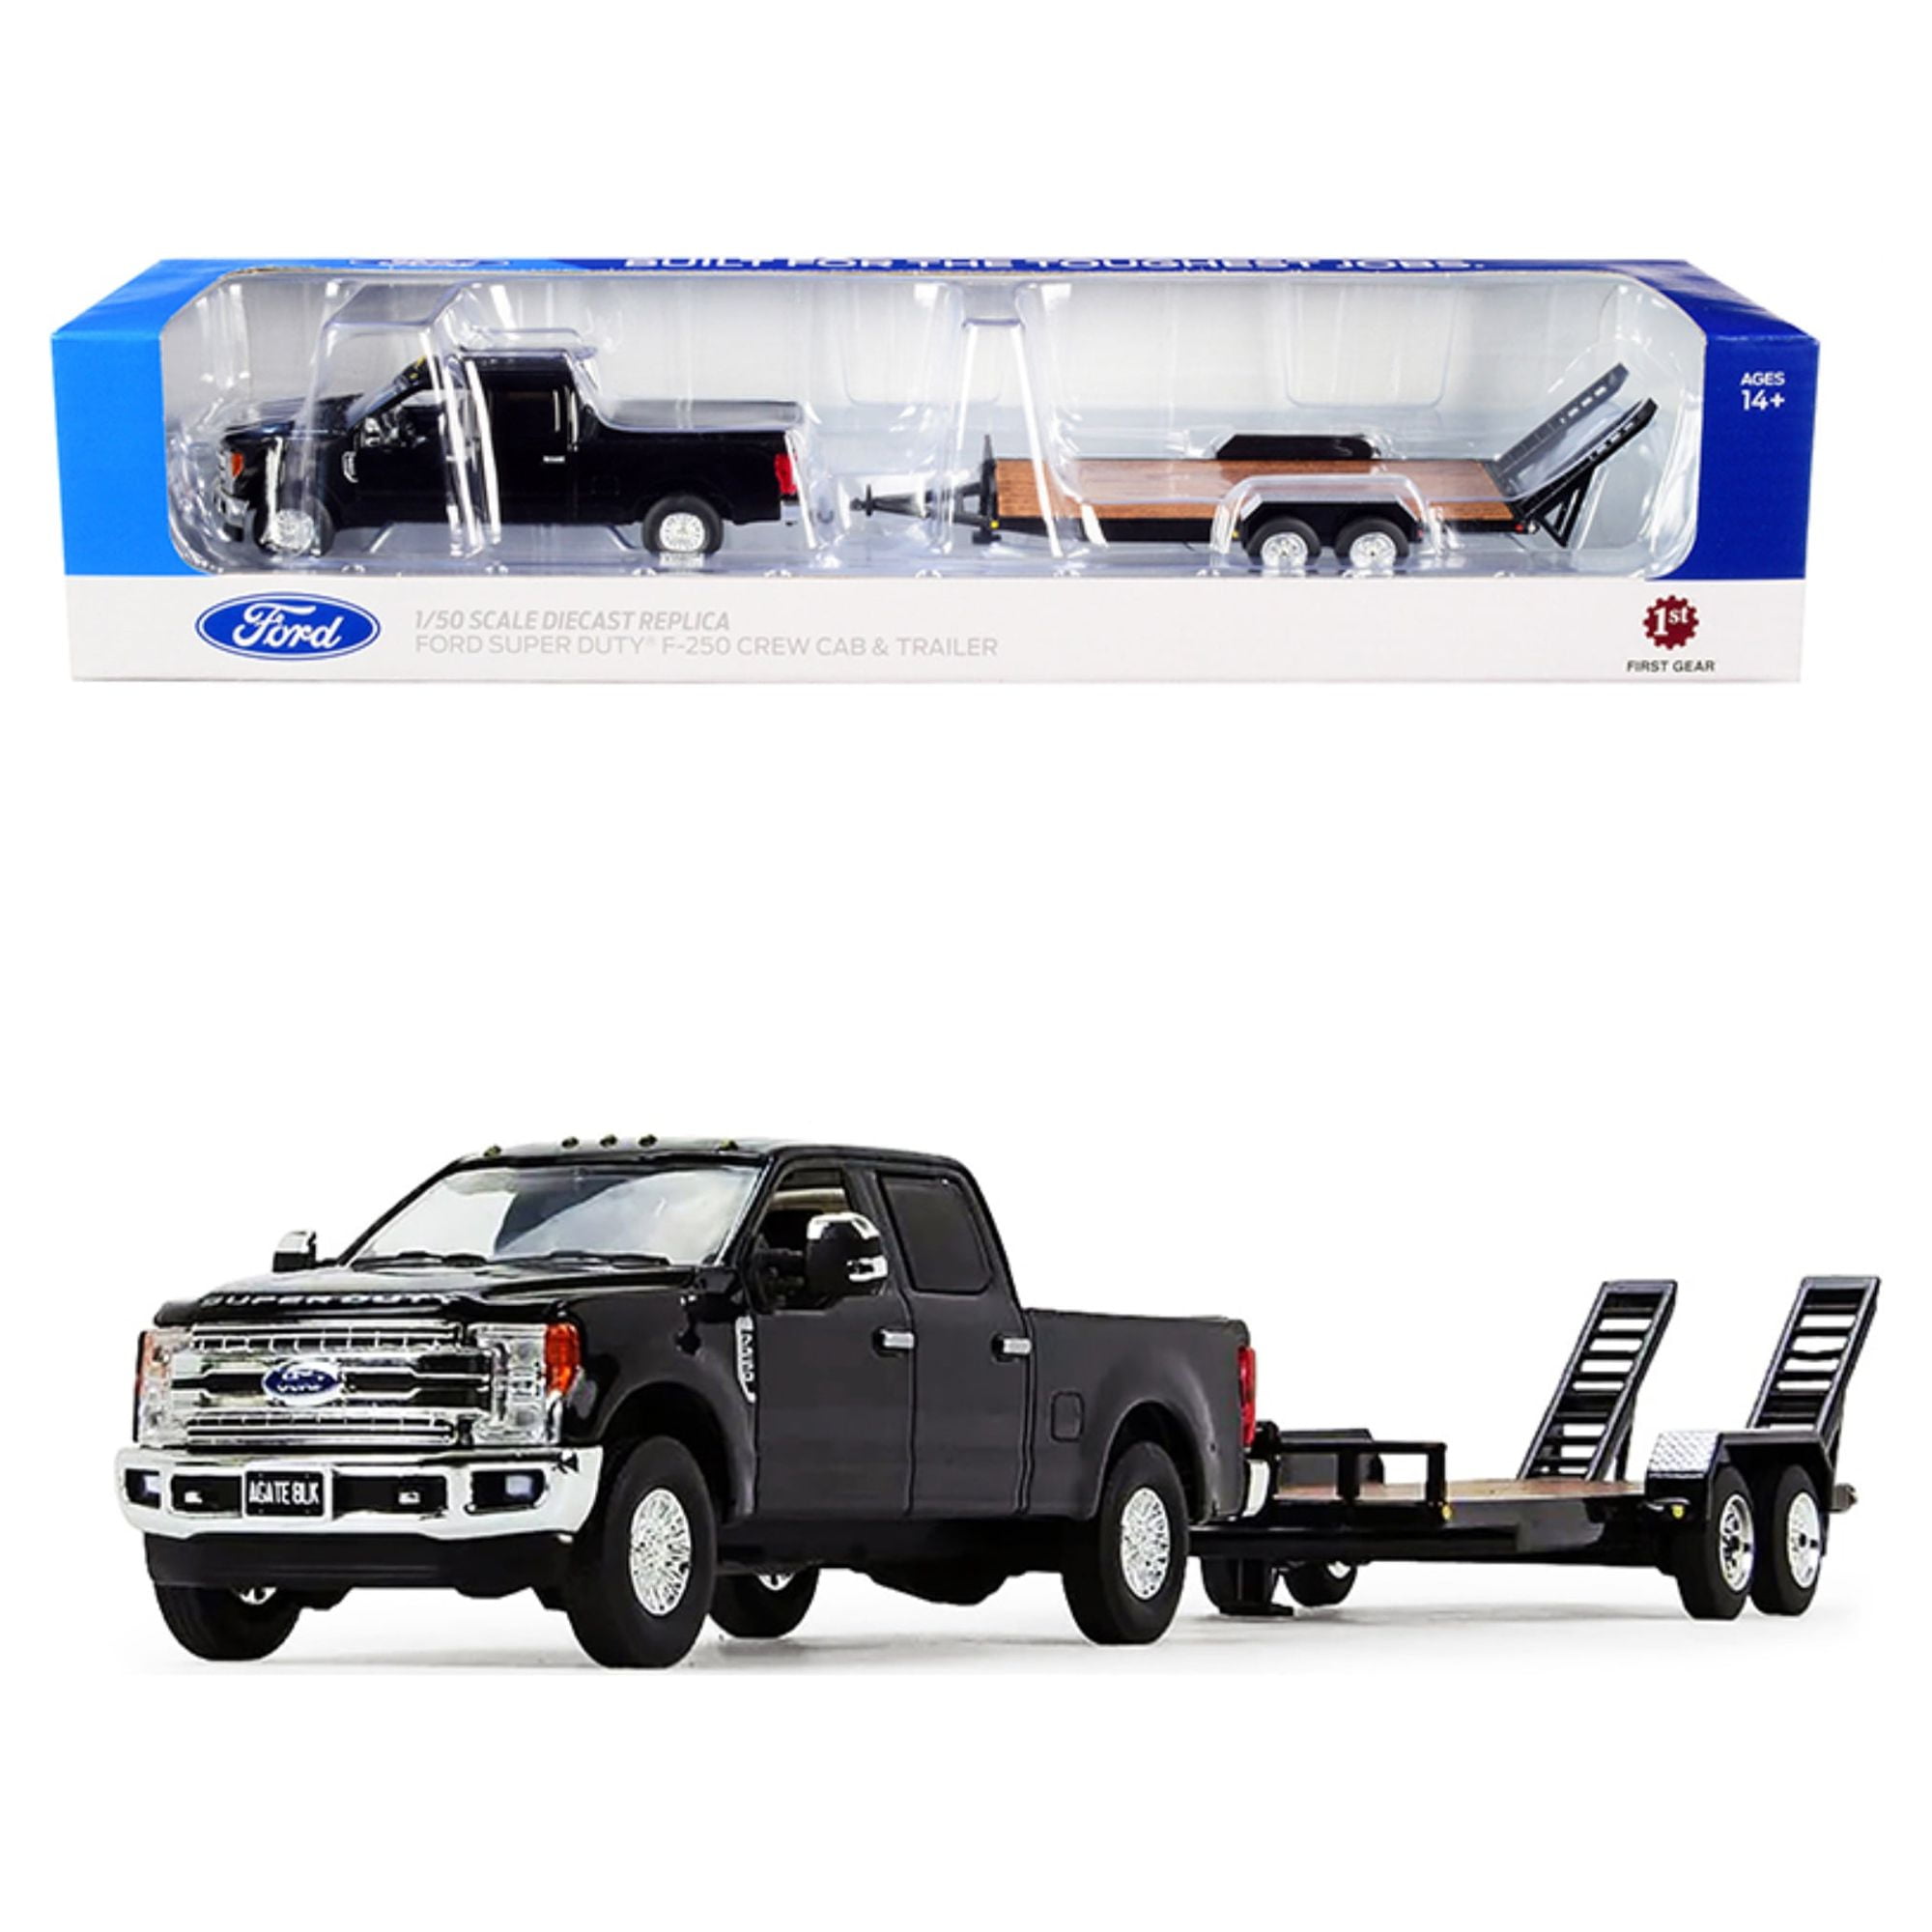 Realtree Ford F250 Super Duty with Boat Scale 1:18